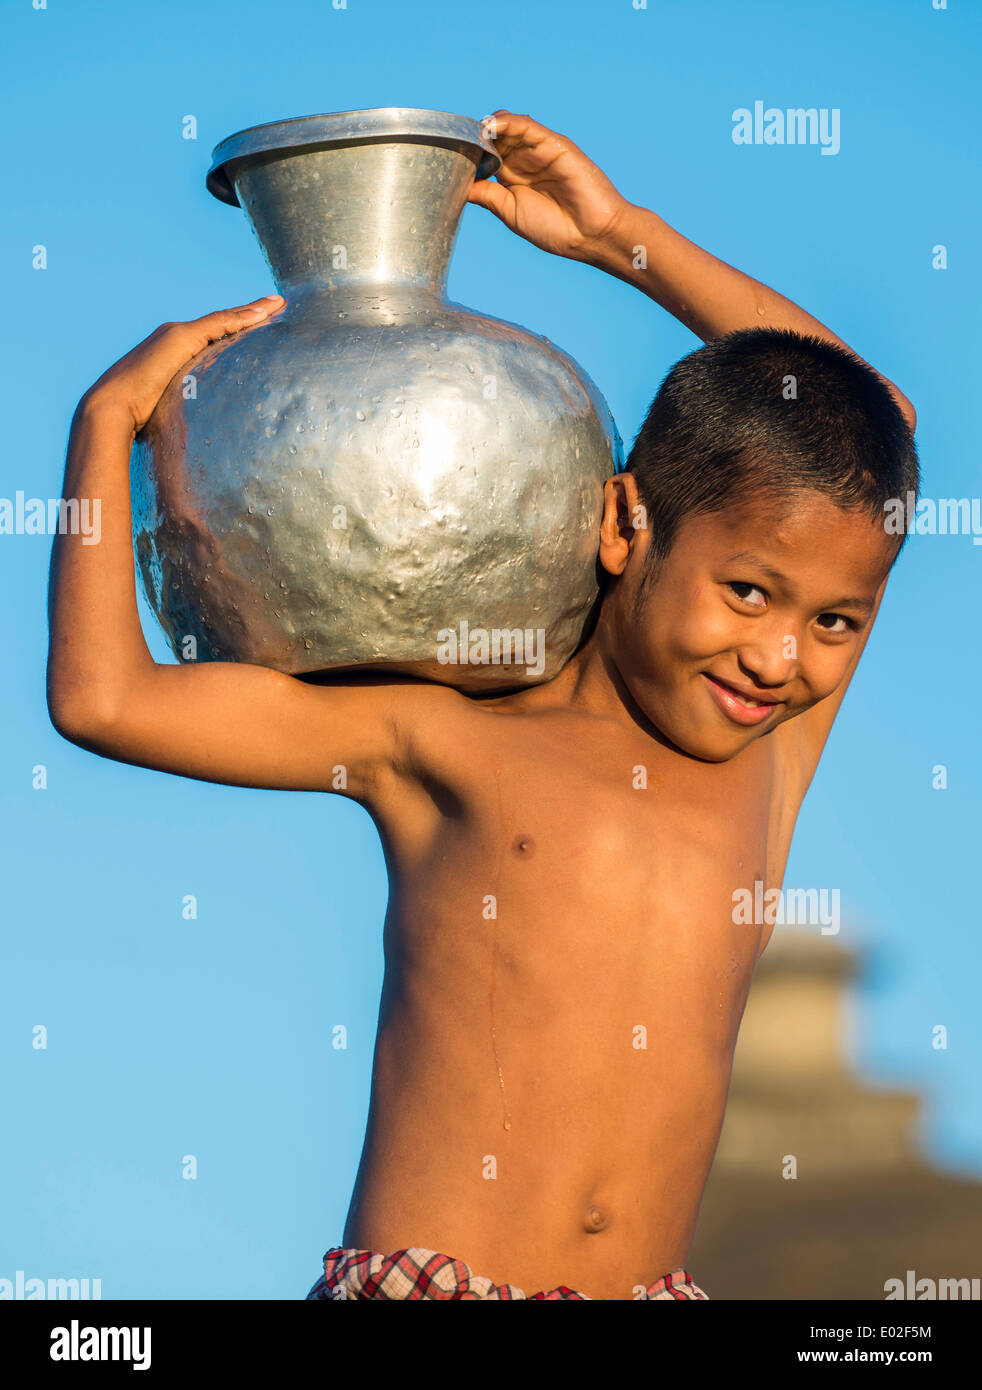 https://c8.alamy.com/comp/E02F5M/smiling-boy-carrying-water-in-a-water-container-made-of-aluminium-E02F5M.jpg